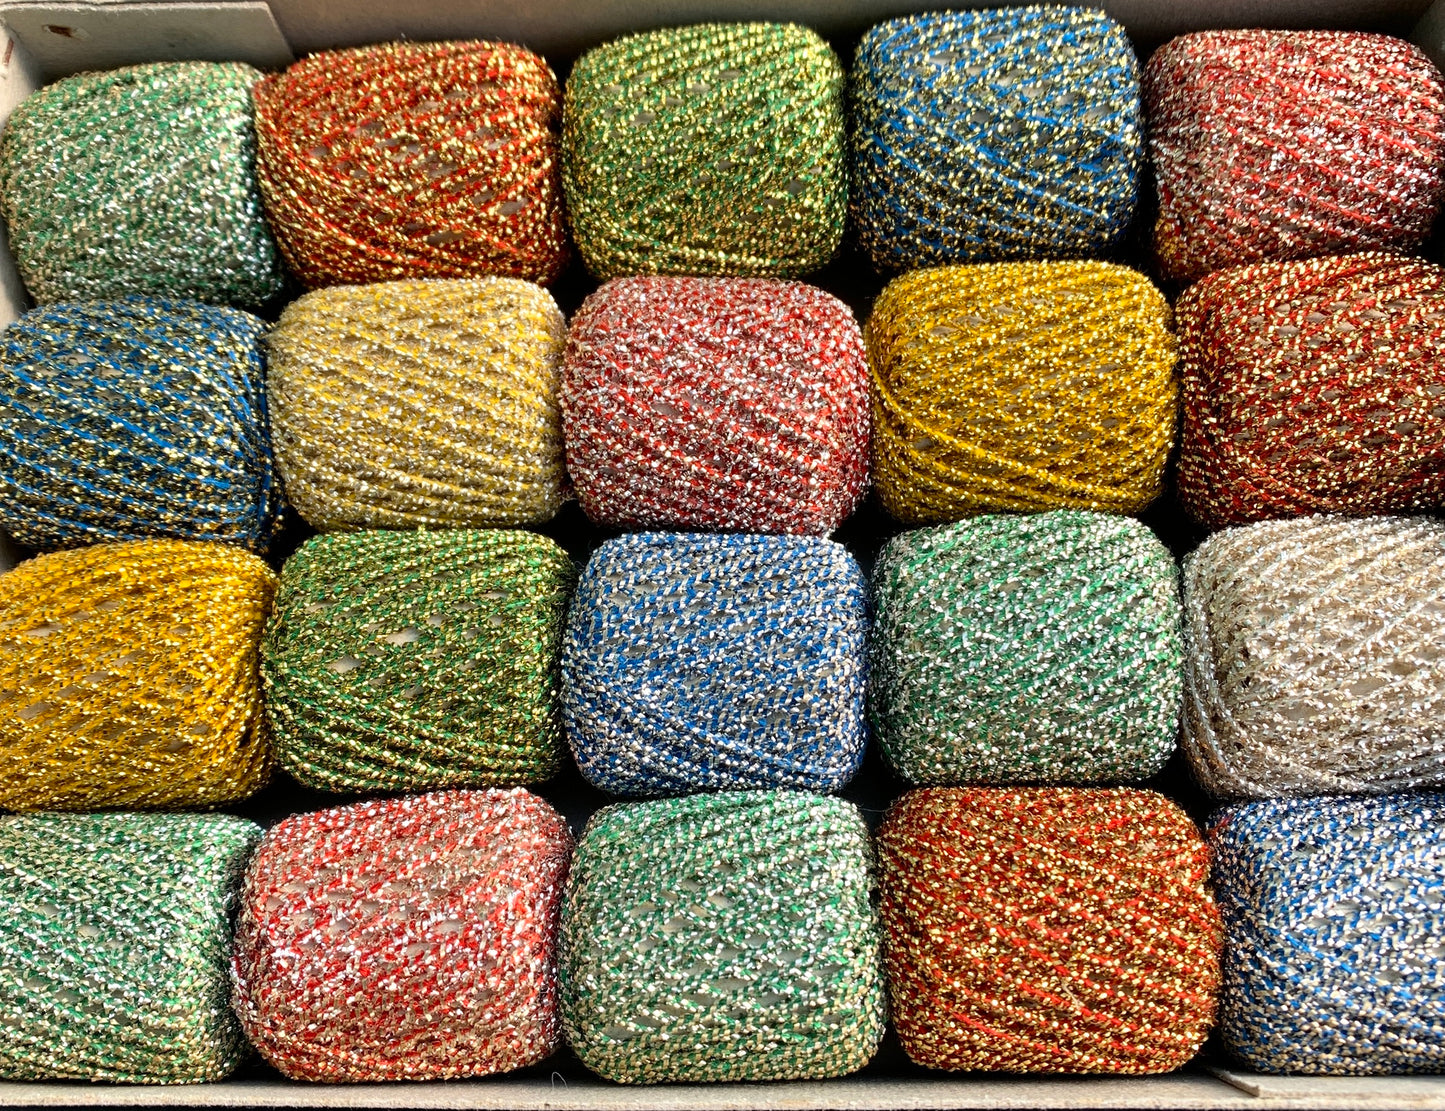 Vintage Box of 20 Reels of Sparkly Cotton and Metallic Strands Thread